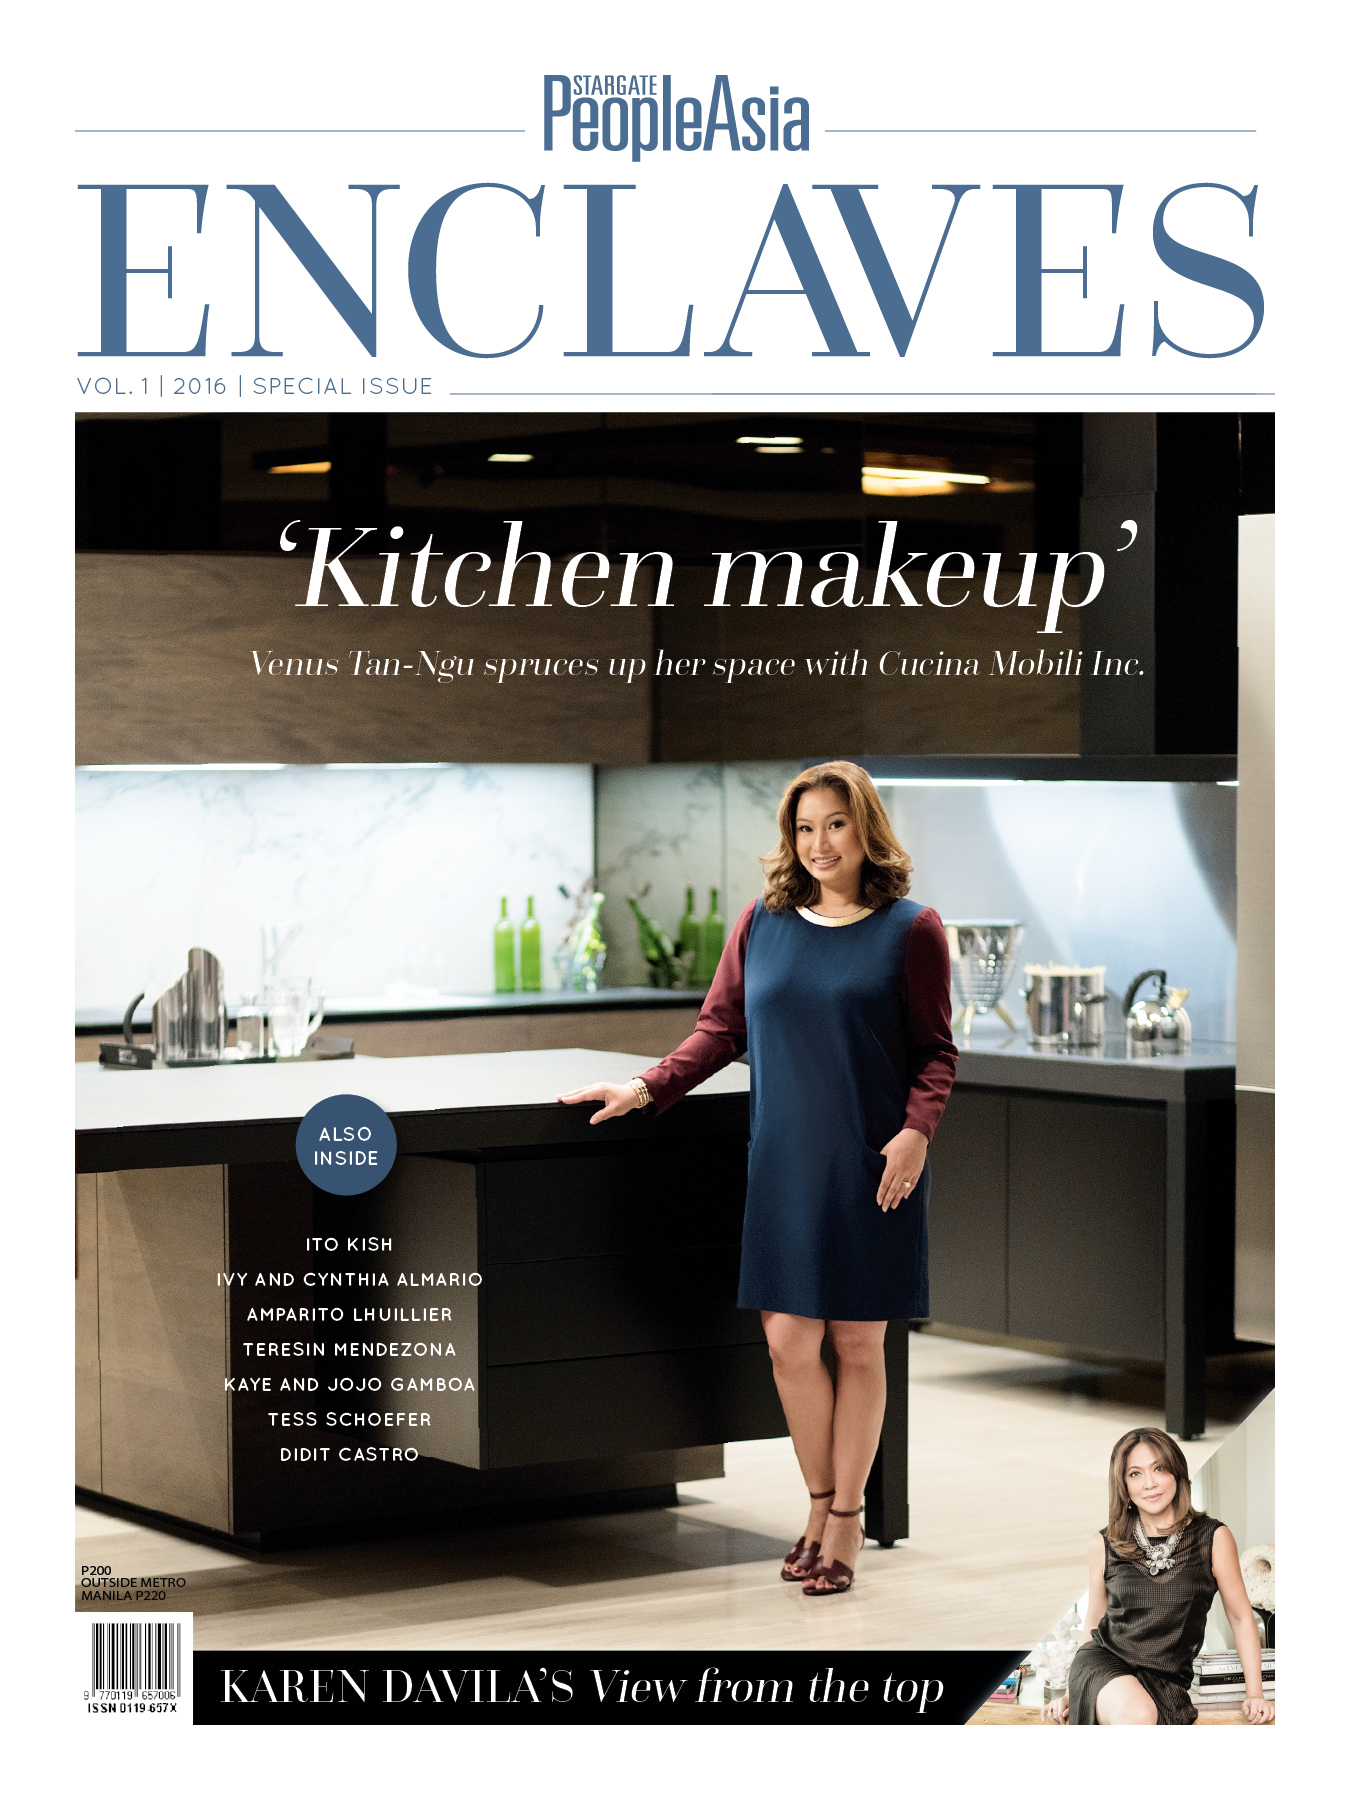 Home & haven with Enclaves